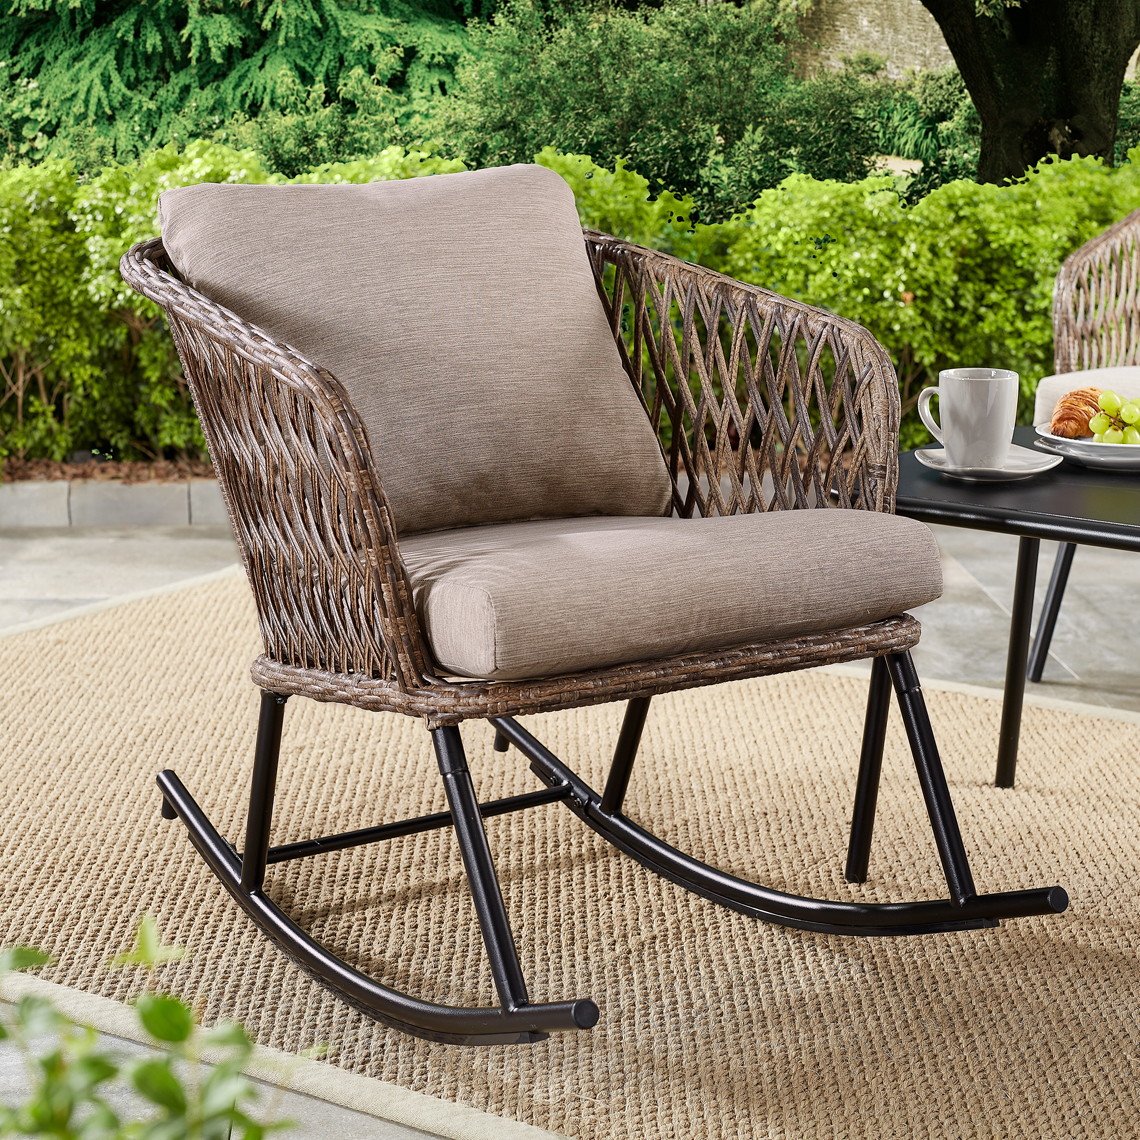 Patio Clearance! Rocking Chairs, as Low as 75 at Walmart